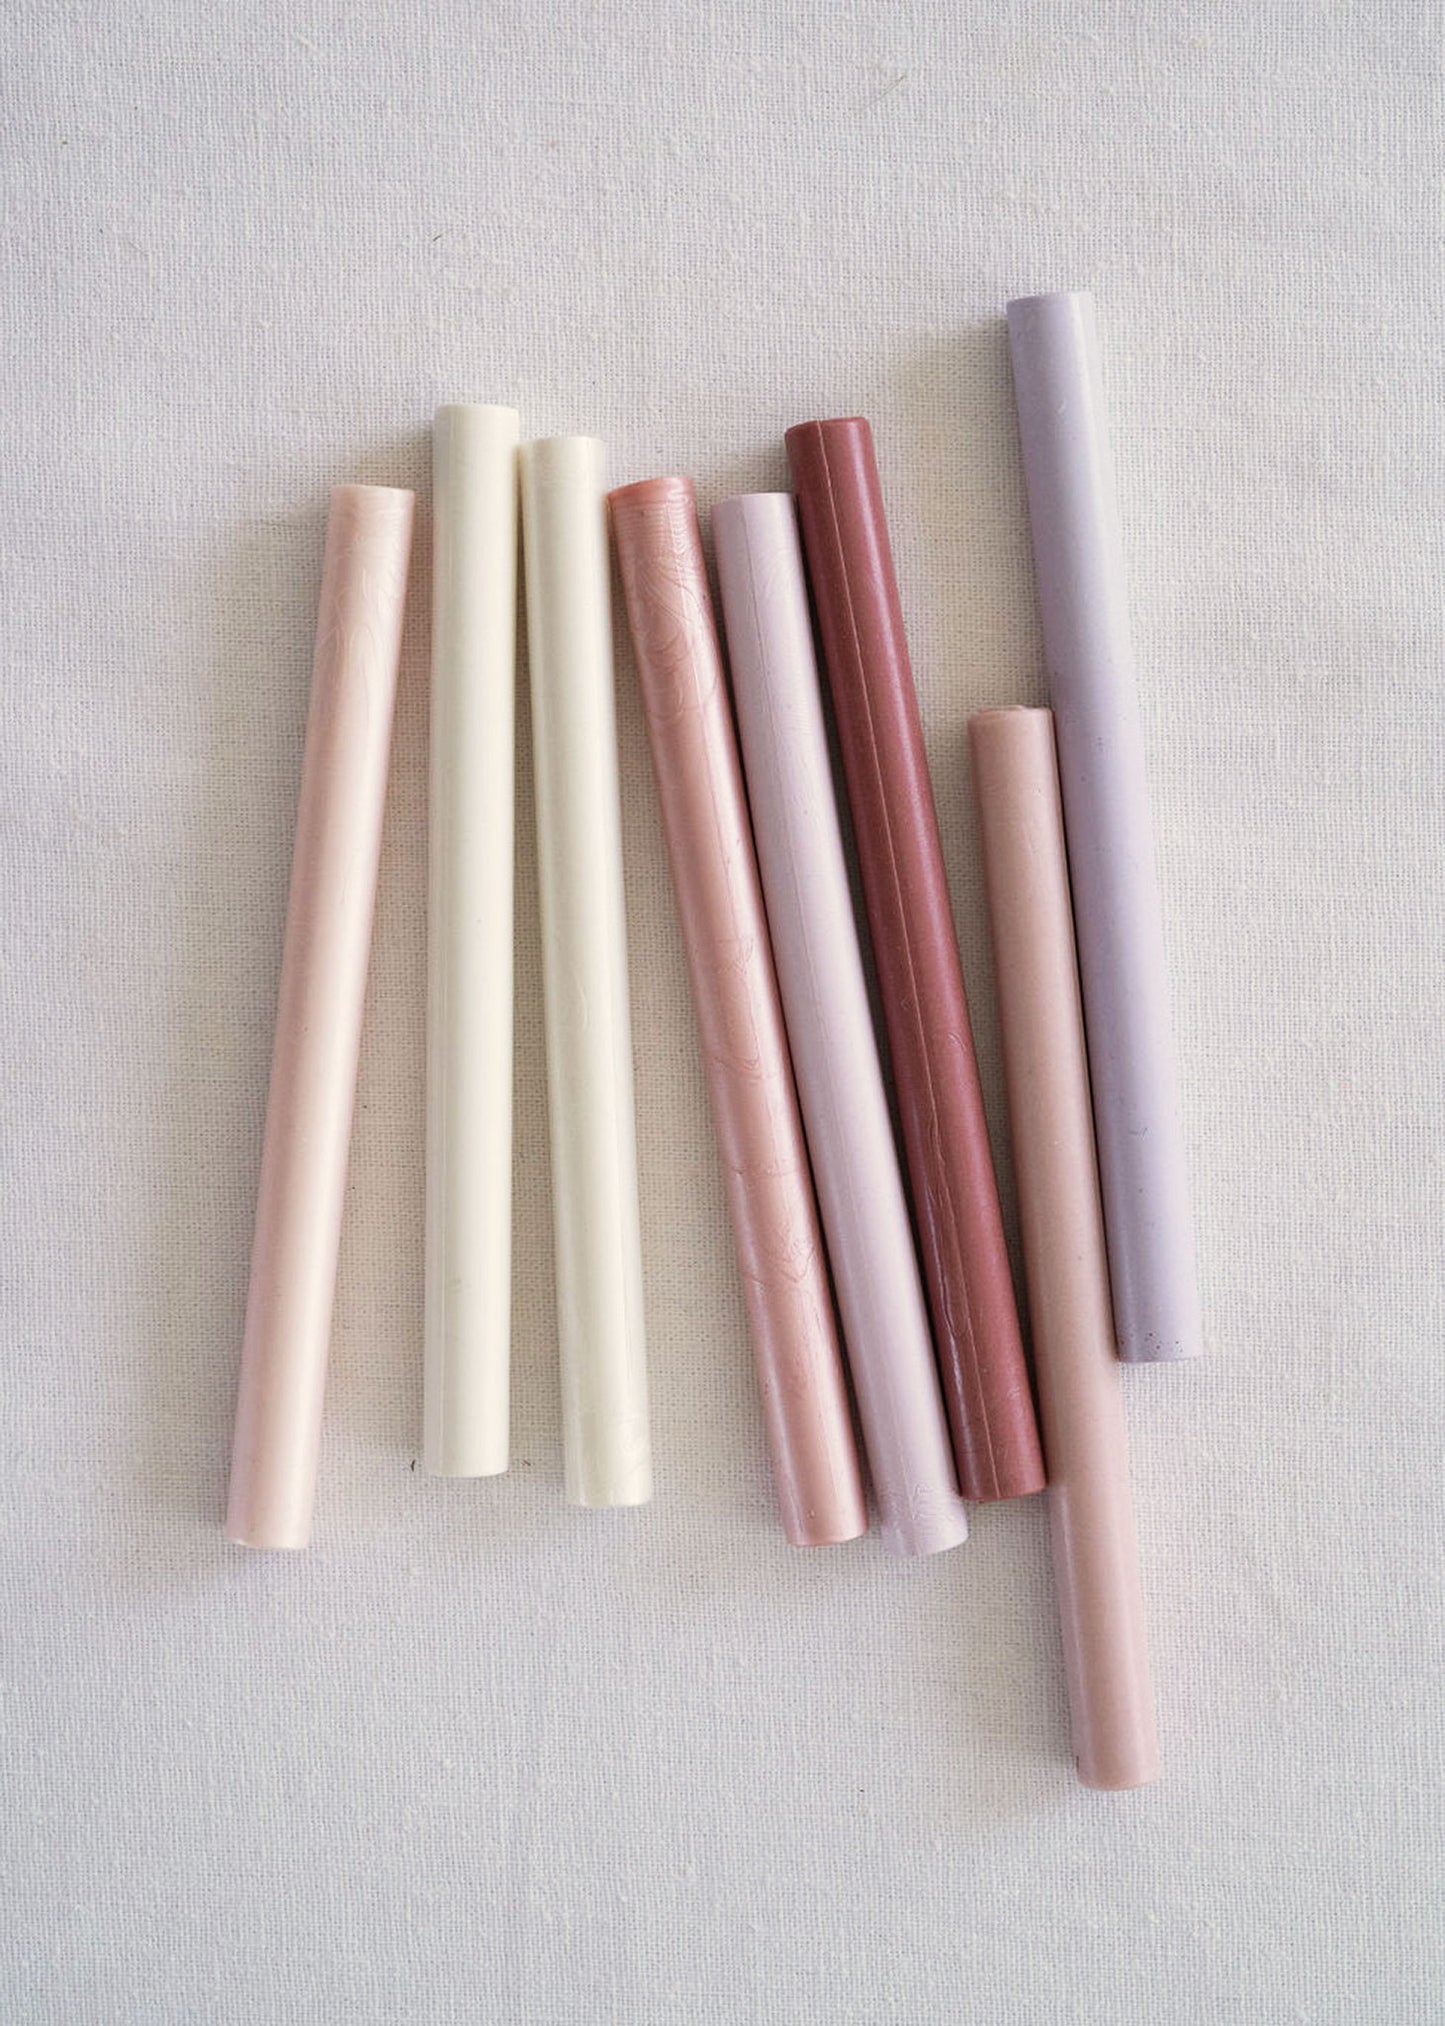 Mixed shades of white, pink and purple wax seal sticks 